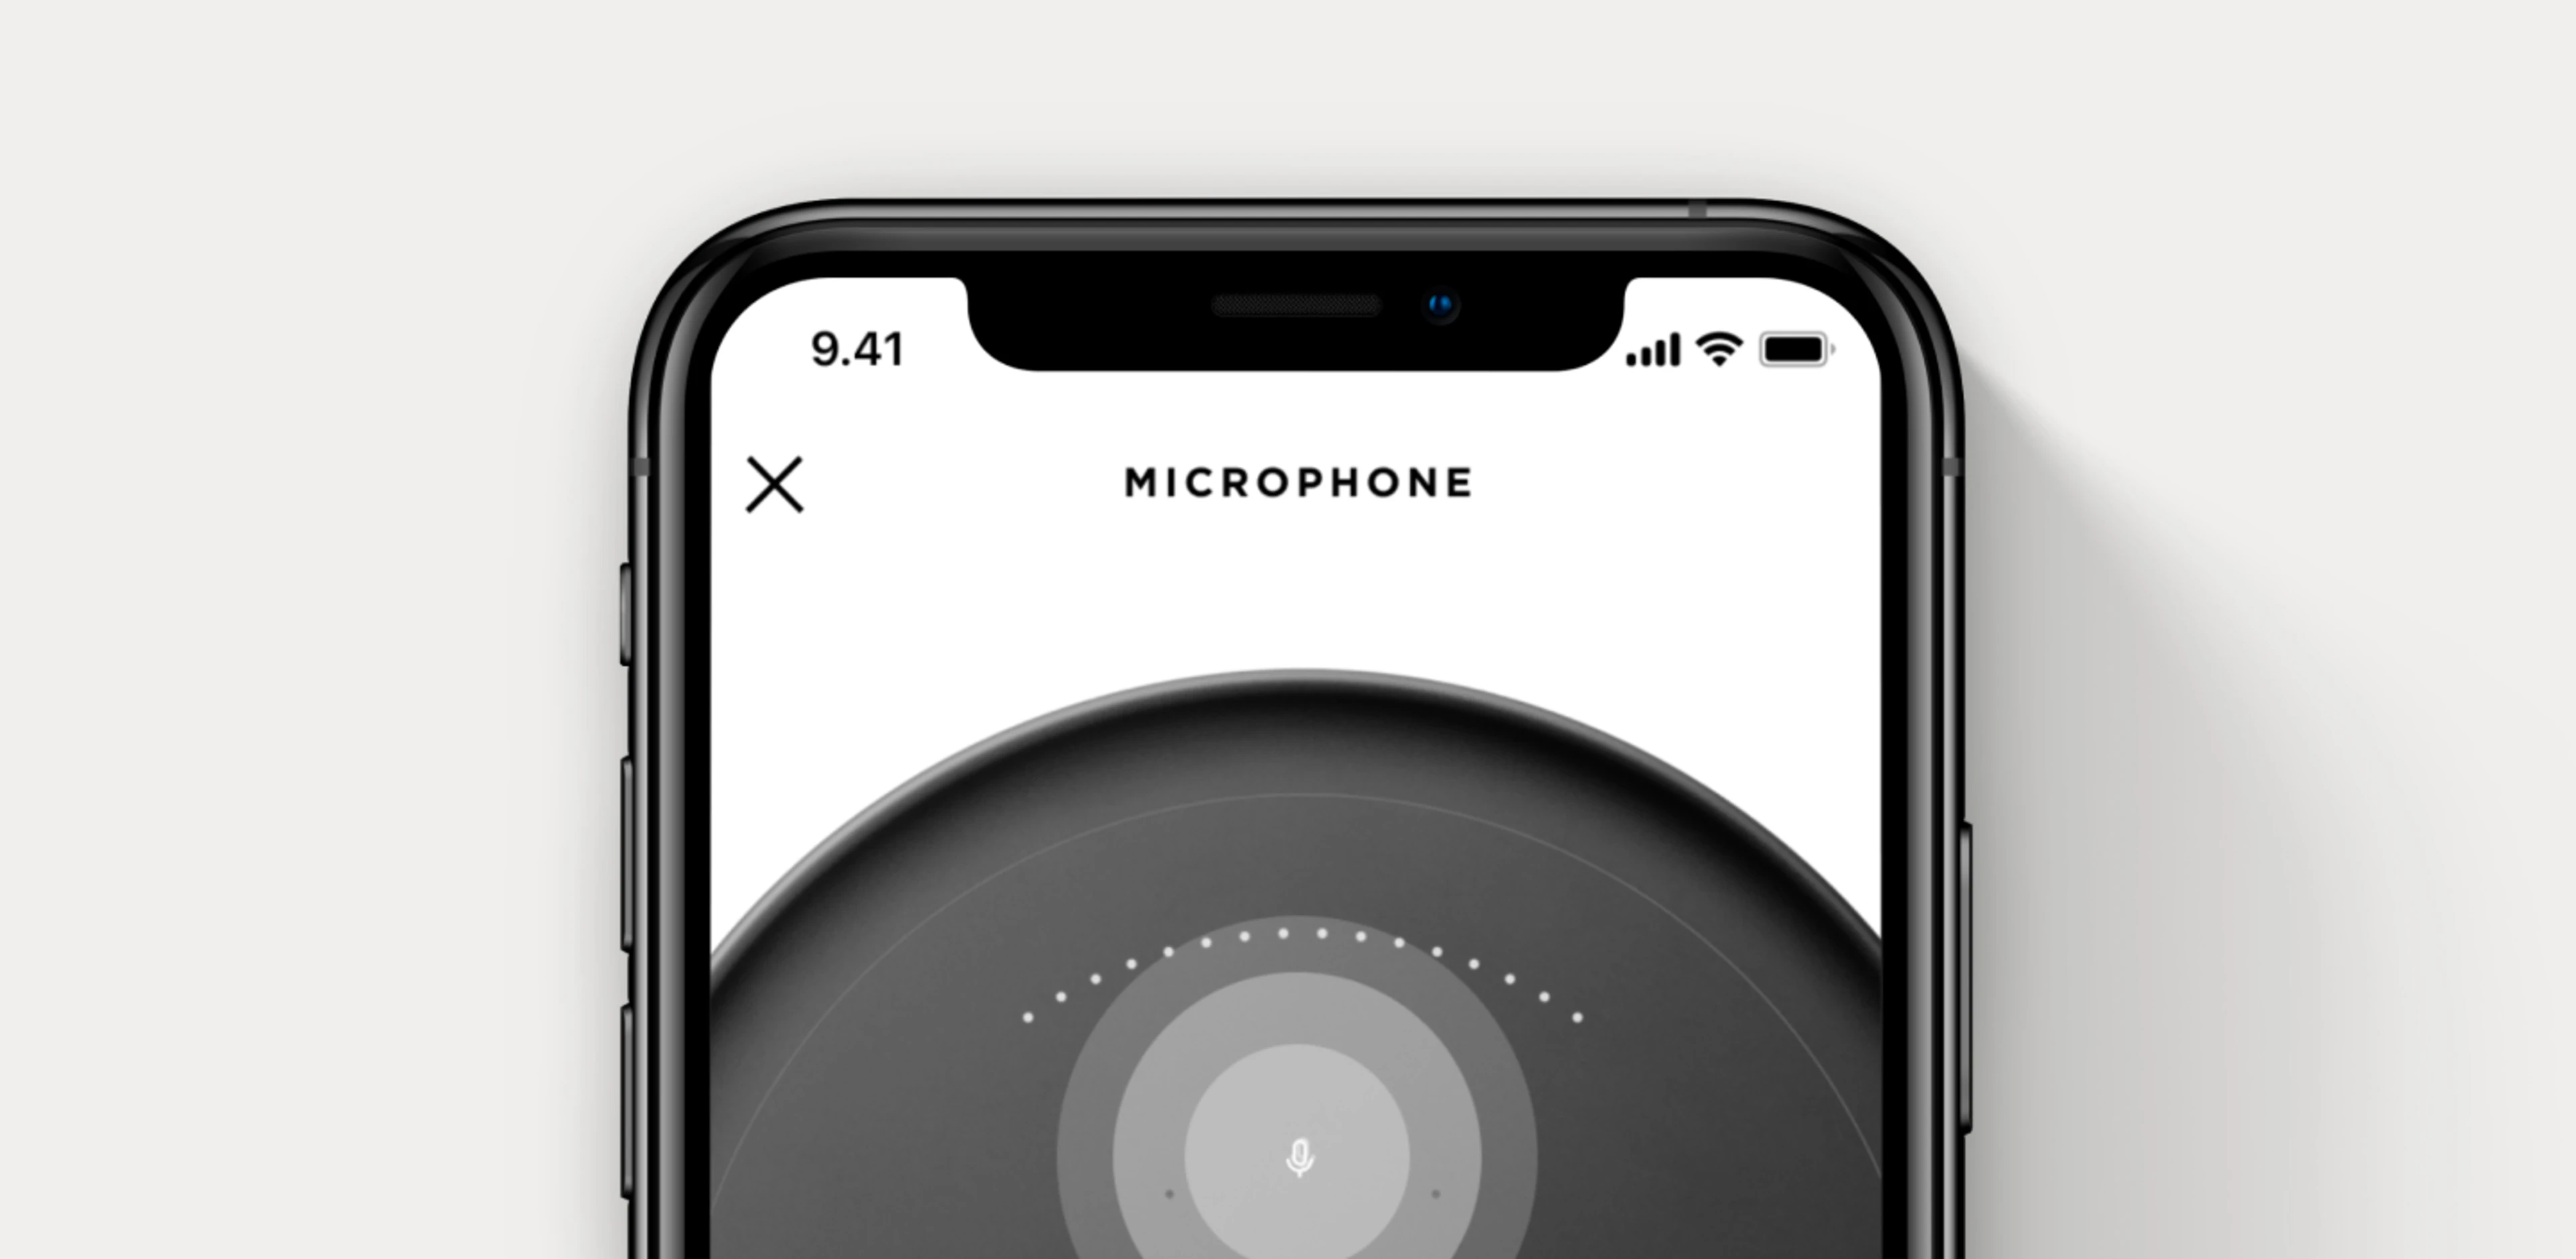 B&O App screen showing the microphone option